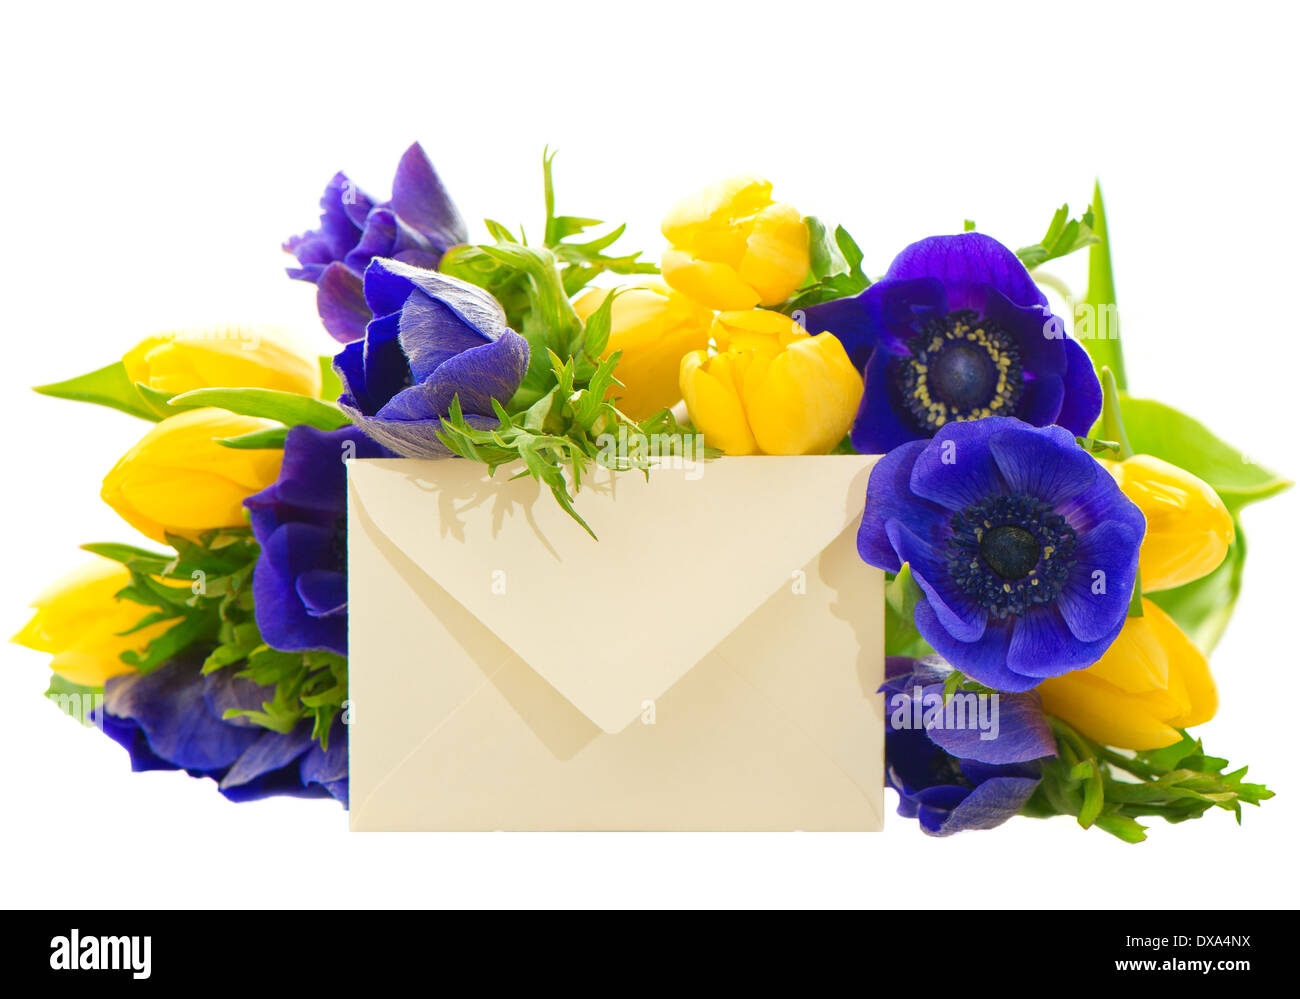 colorful flowers bouquet. yellow tulips and blue anemone Stock Photo